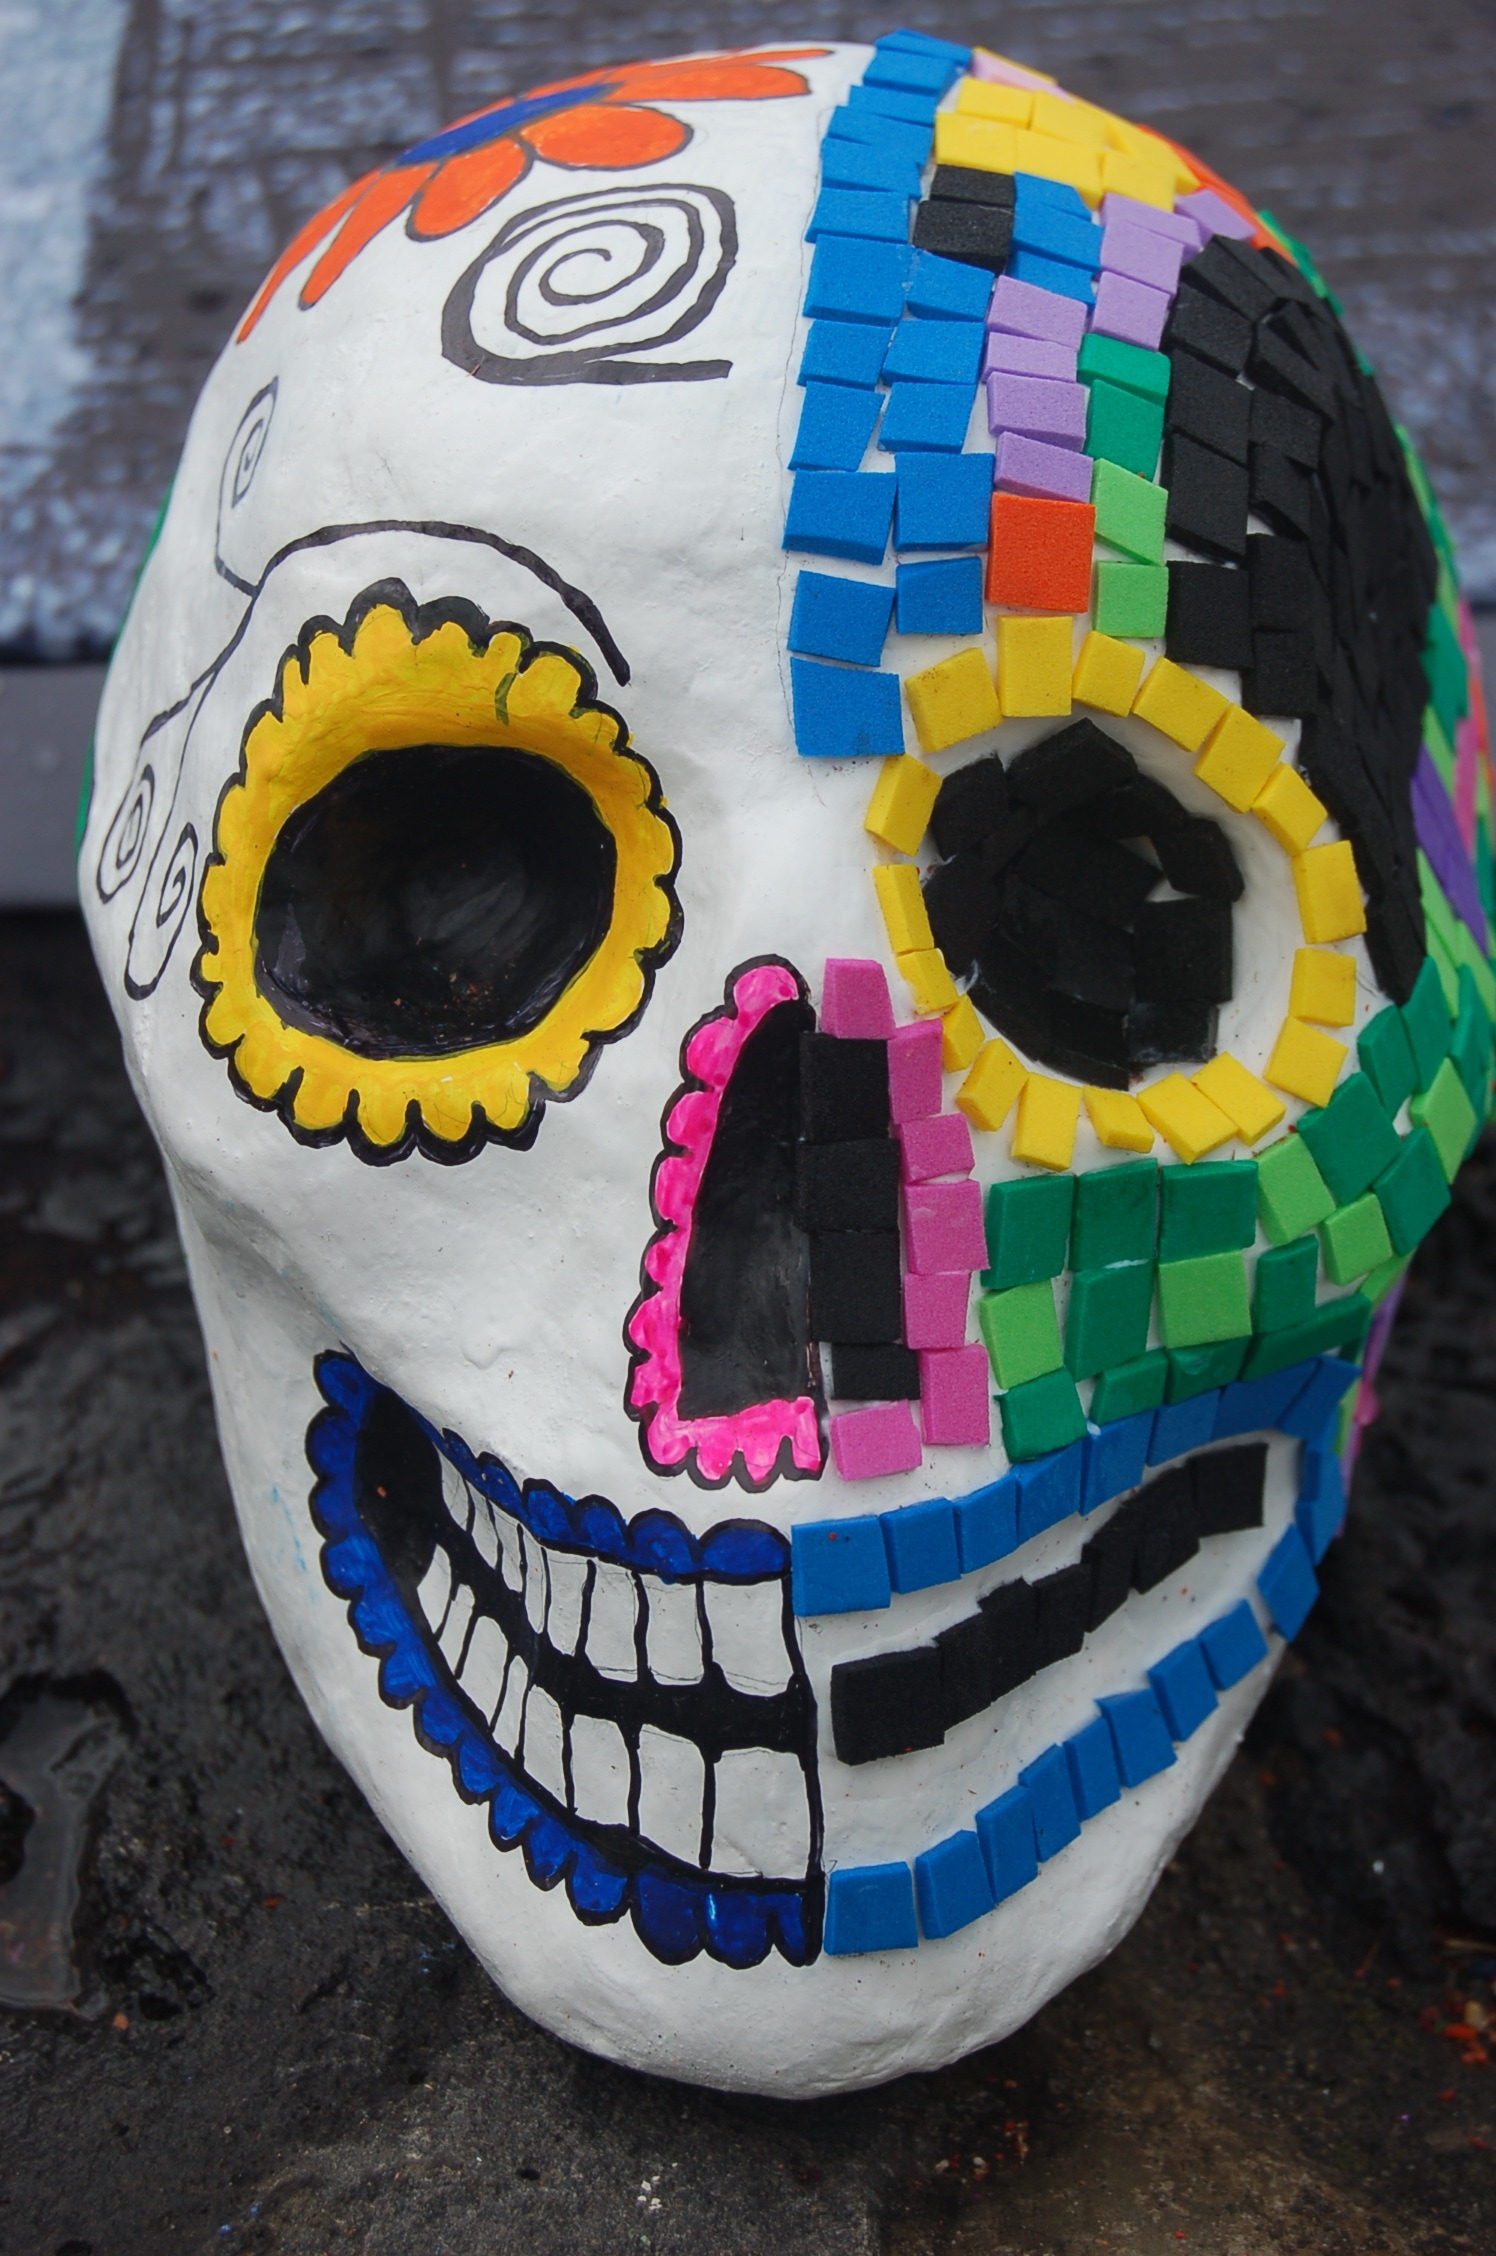 blue red yellow and multicolored day of the dead skull figurine